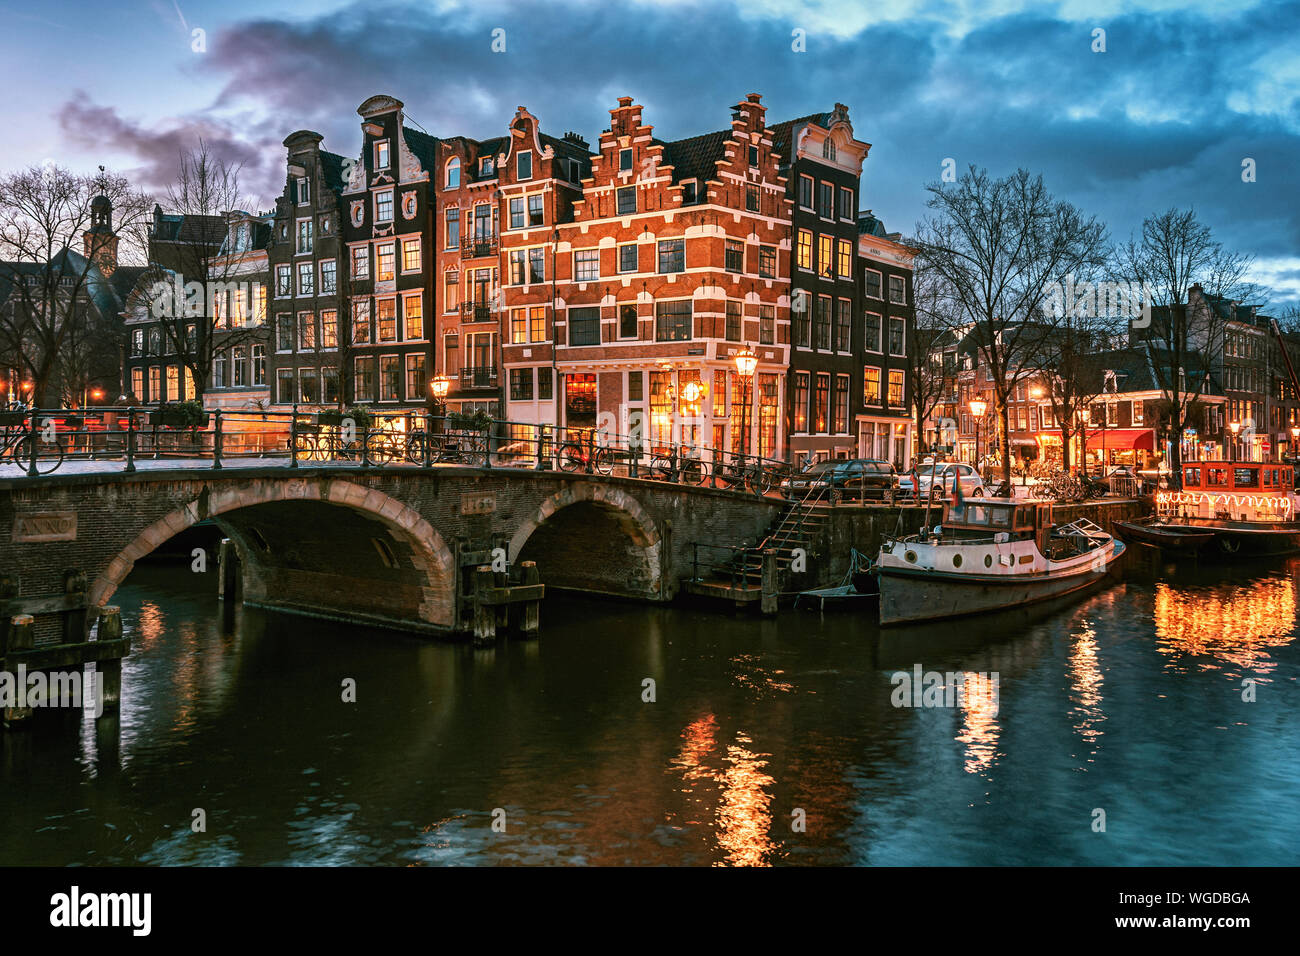 Beautiful canal houses on the corner of Brouwersgracht and Prinsengracht in the old center of Amsterdam in The Netherlands during sunset Stock Photo